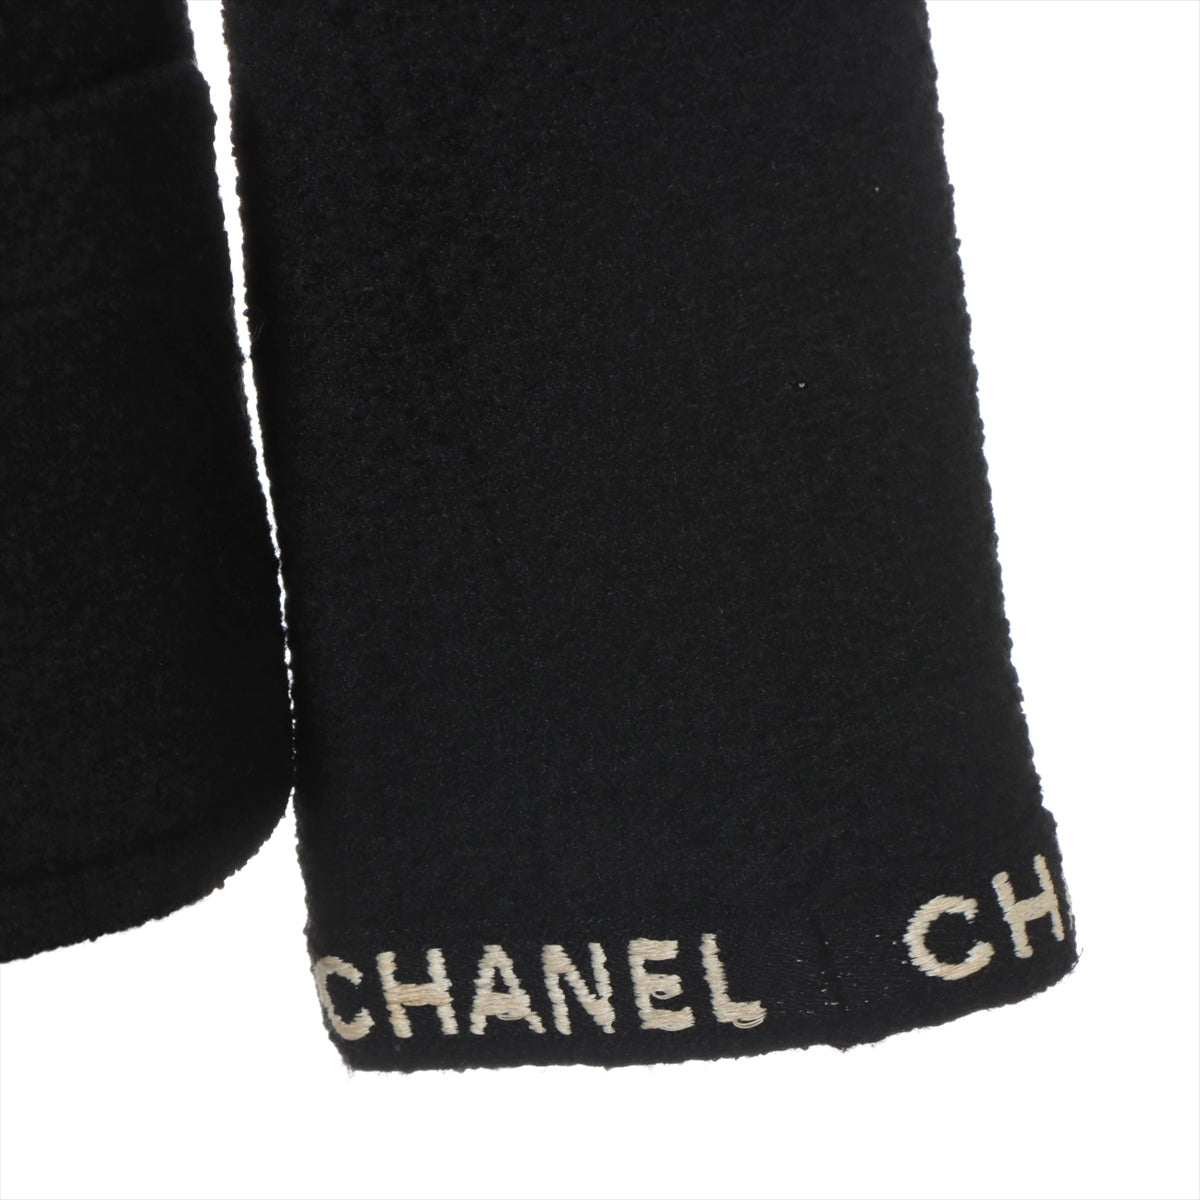 Chanel Coco Button 95A Wool & Nylon Jacket 38 Ladies' Black  P05747V04386 Tweed Logo embroidery